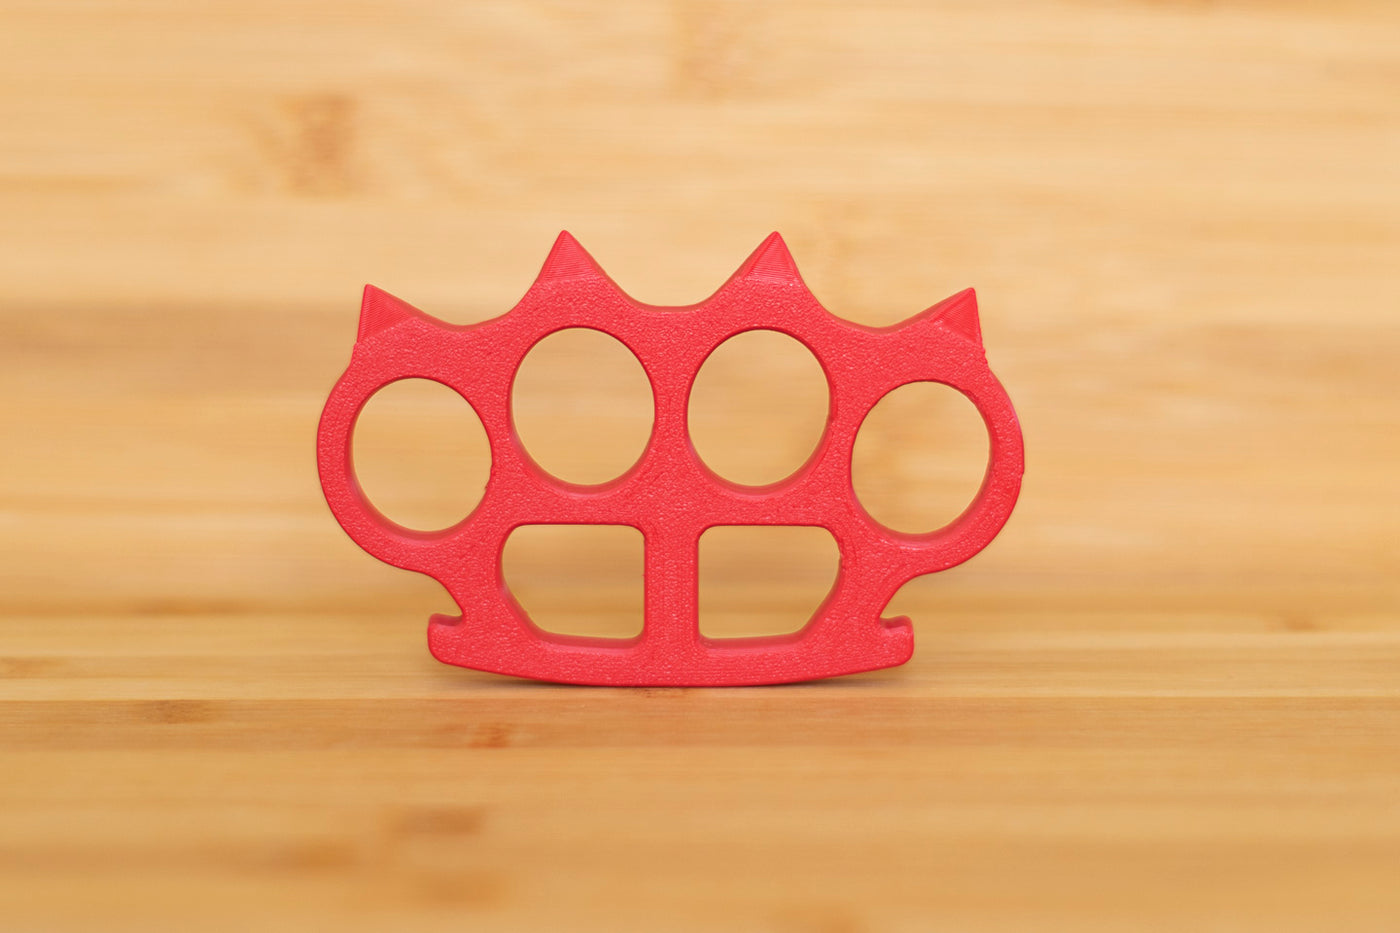 Spiked Brass Knuckles - Funny Decal 